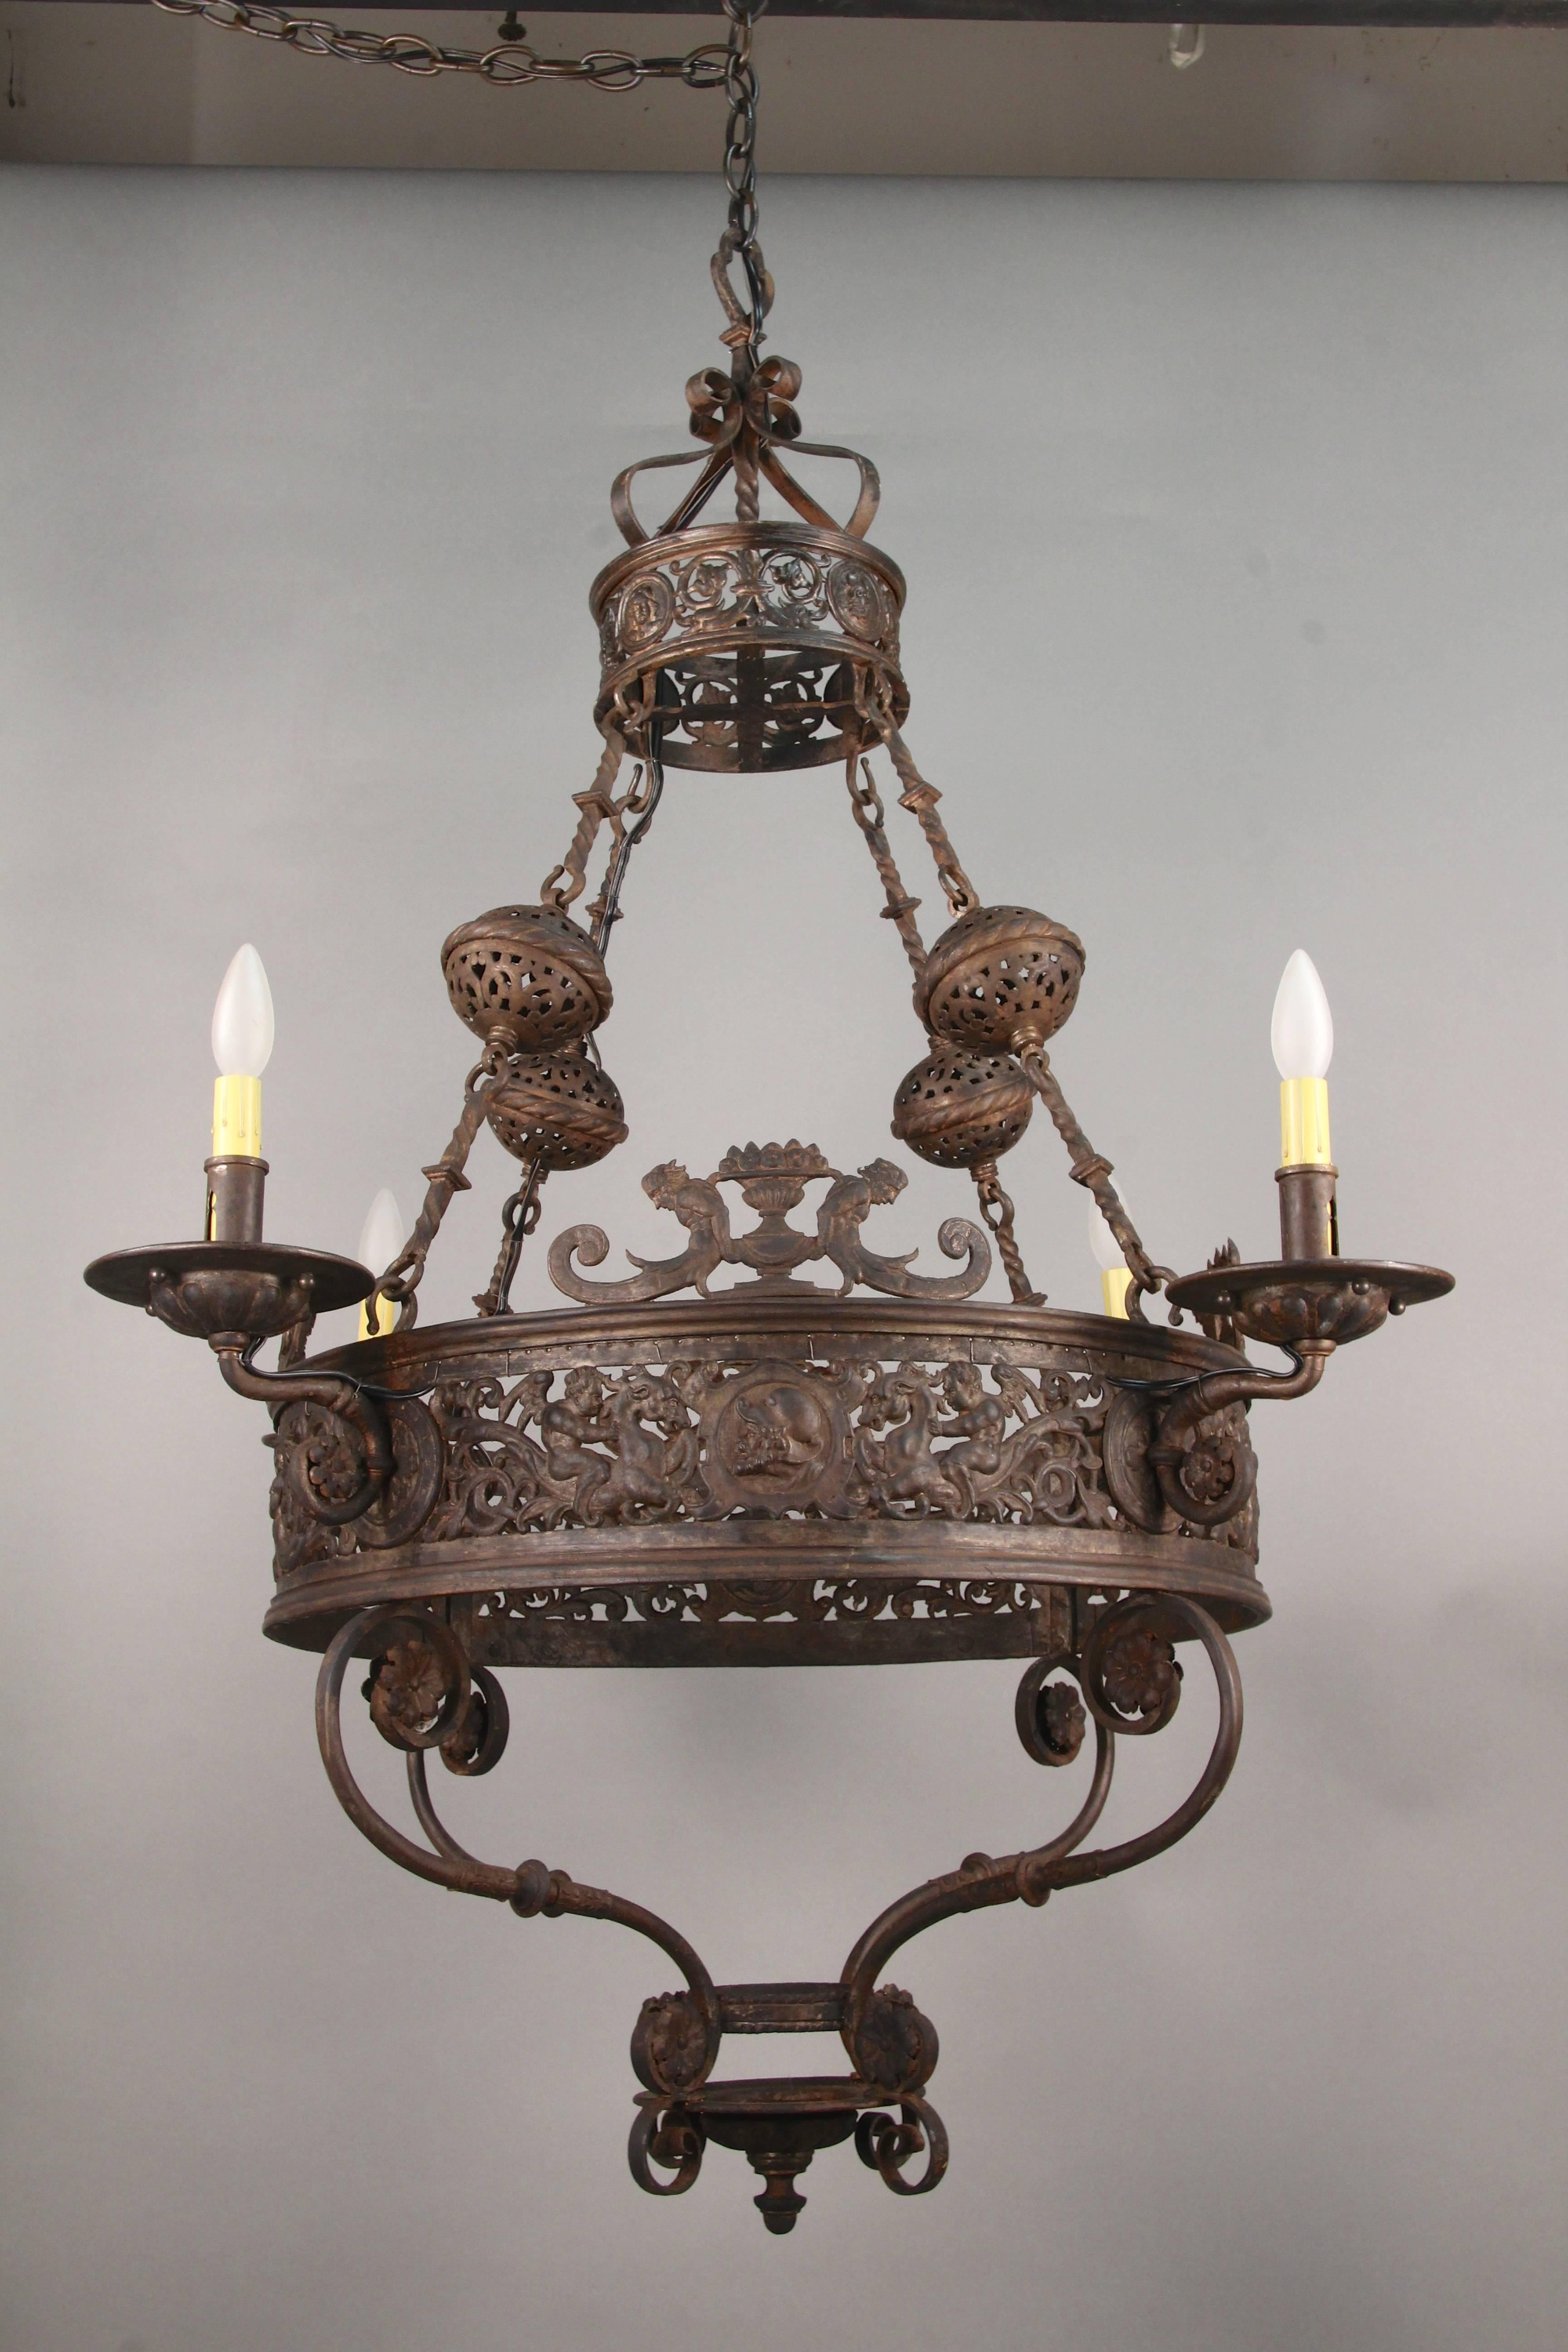 Impressive turn of the century large-scale 1920s chandelier with mythical figures. Incredible fine casting.